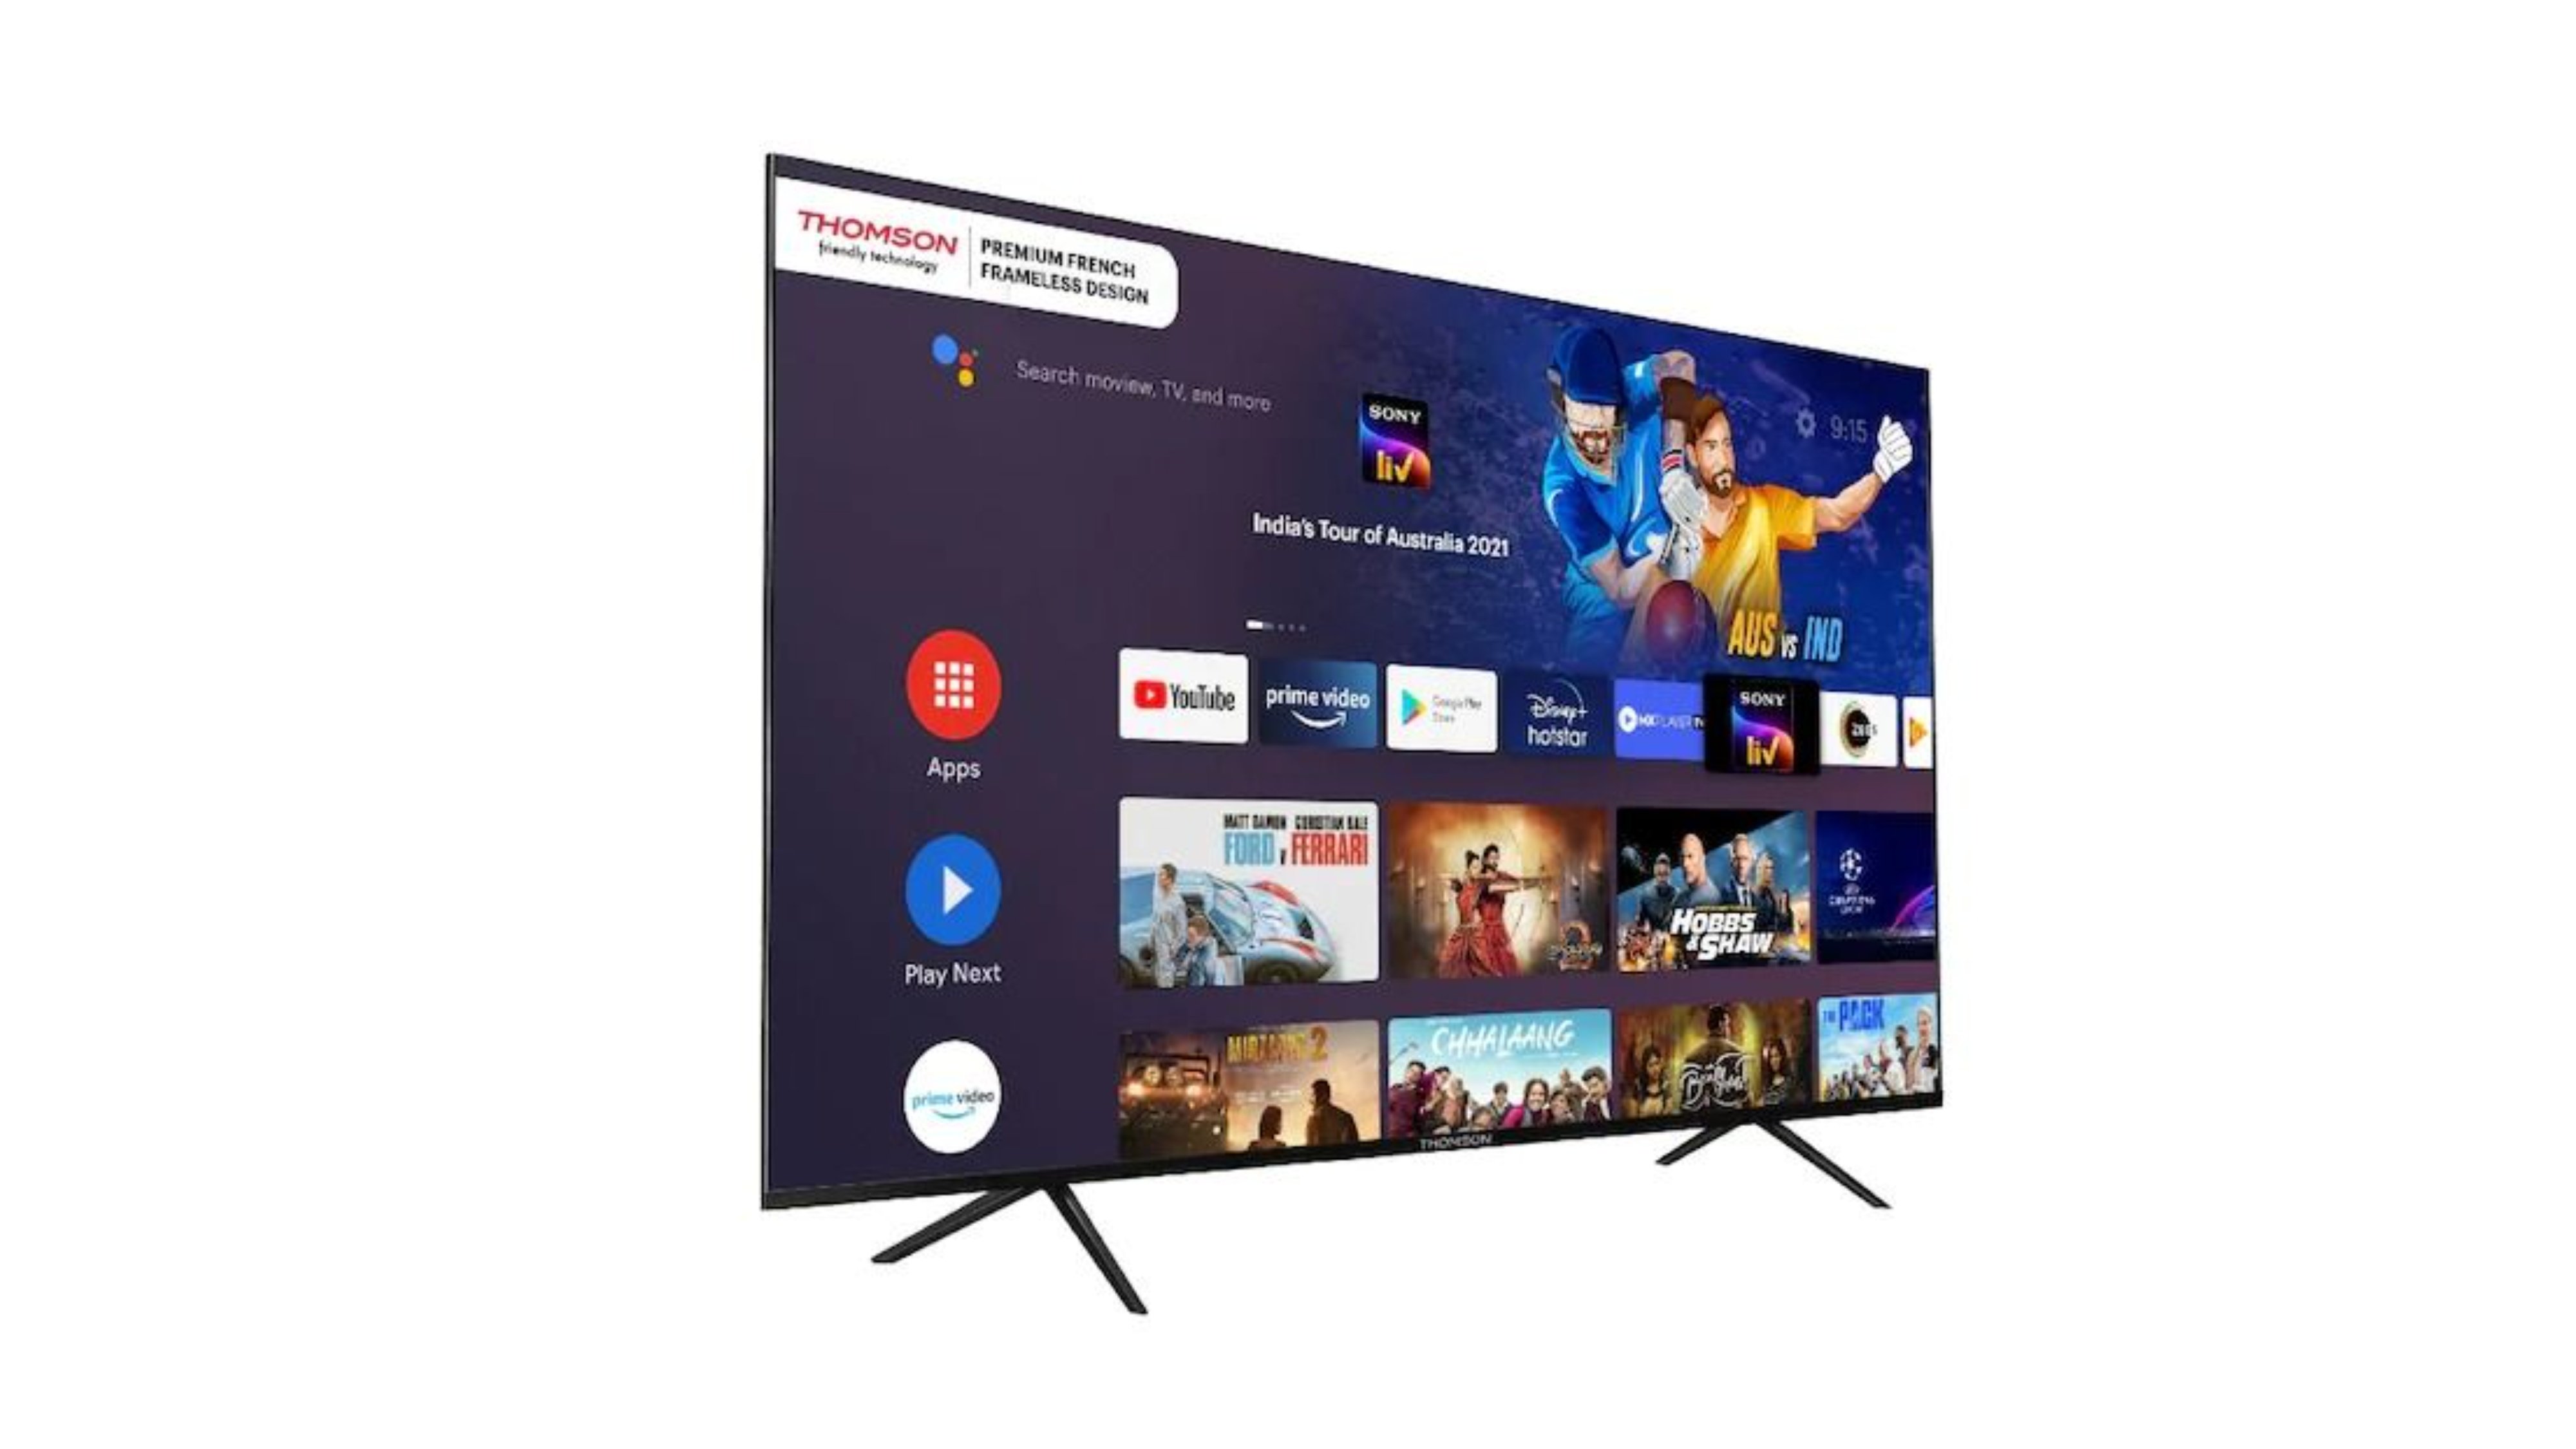 Thomson Path Series Smart TV Featured